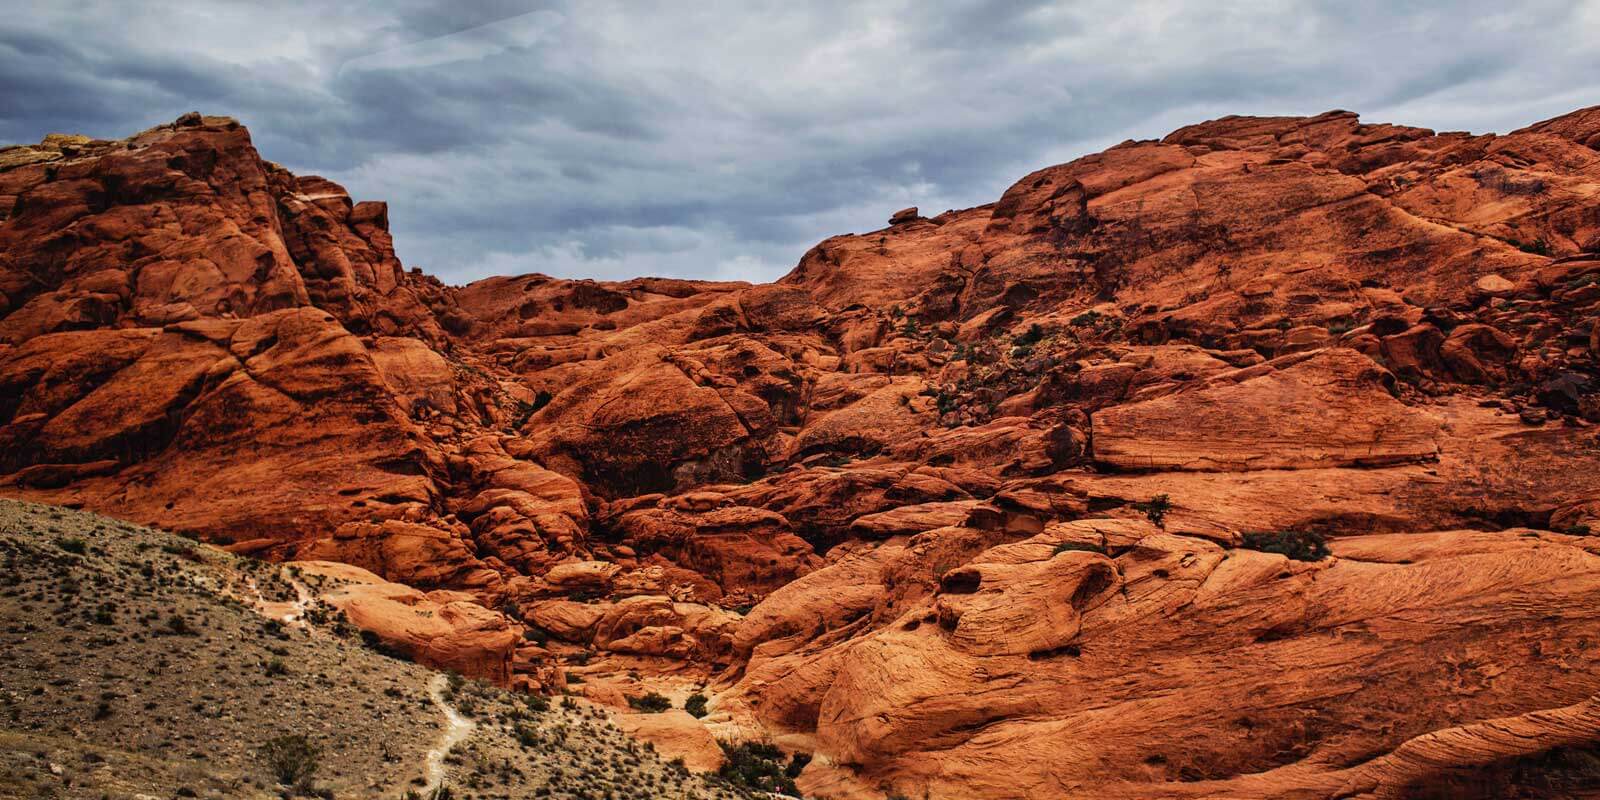 Landscape photo of rusty red rock formations set against a cloudy sky.